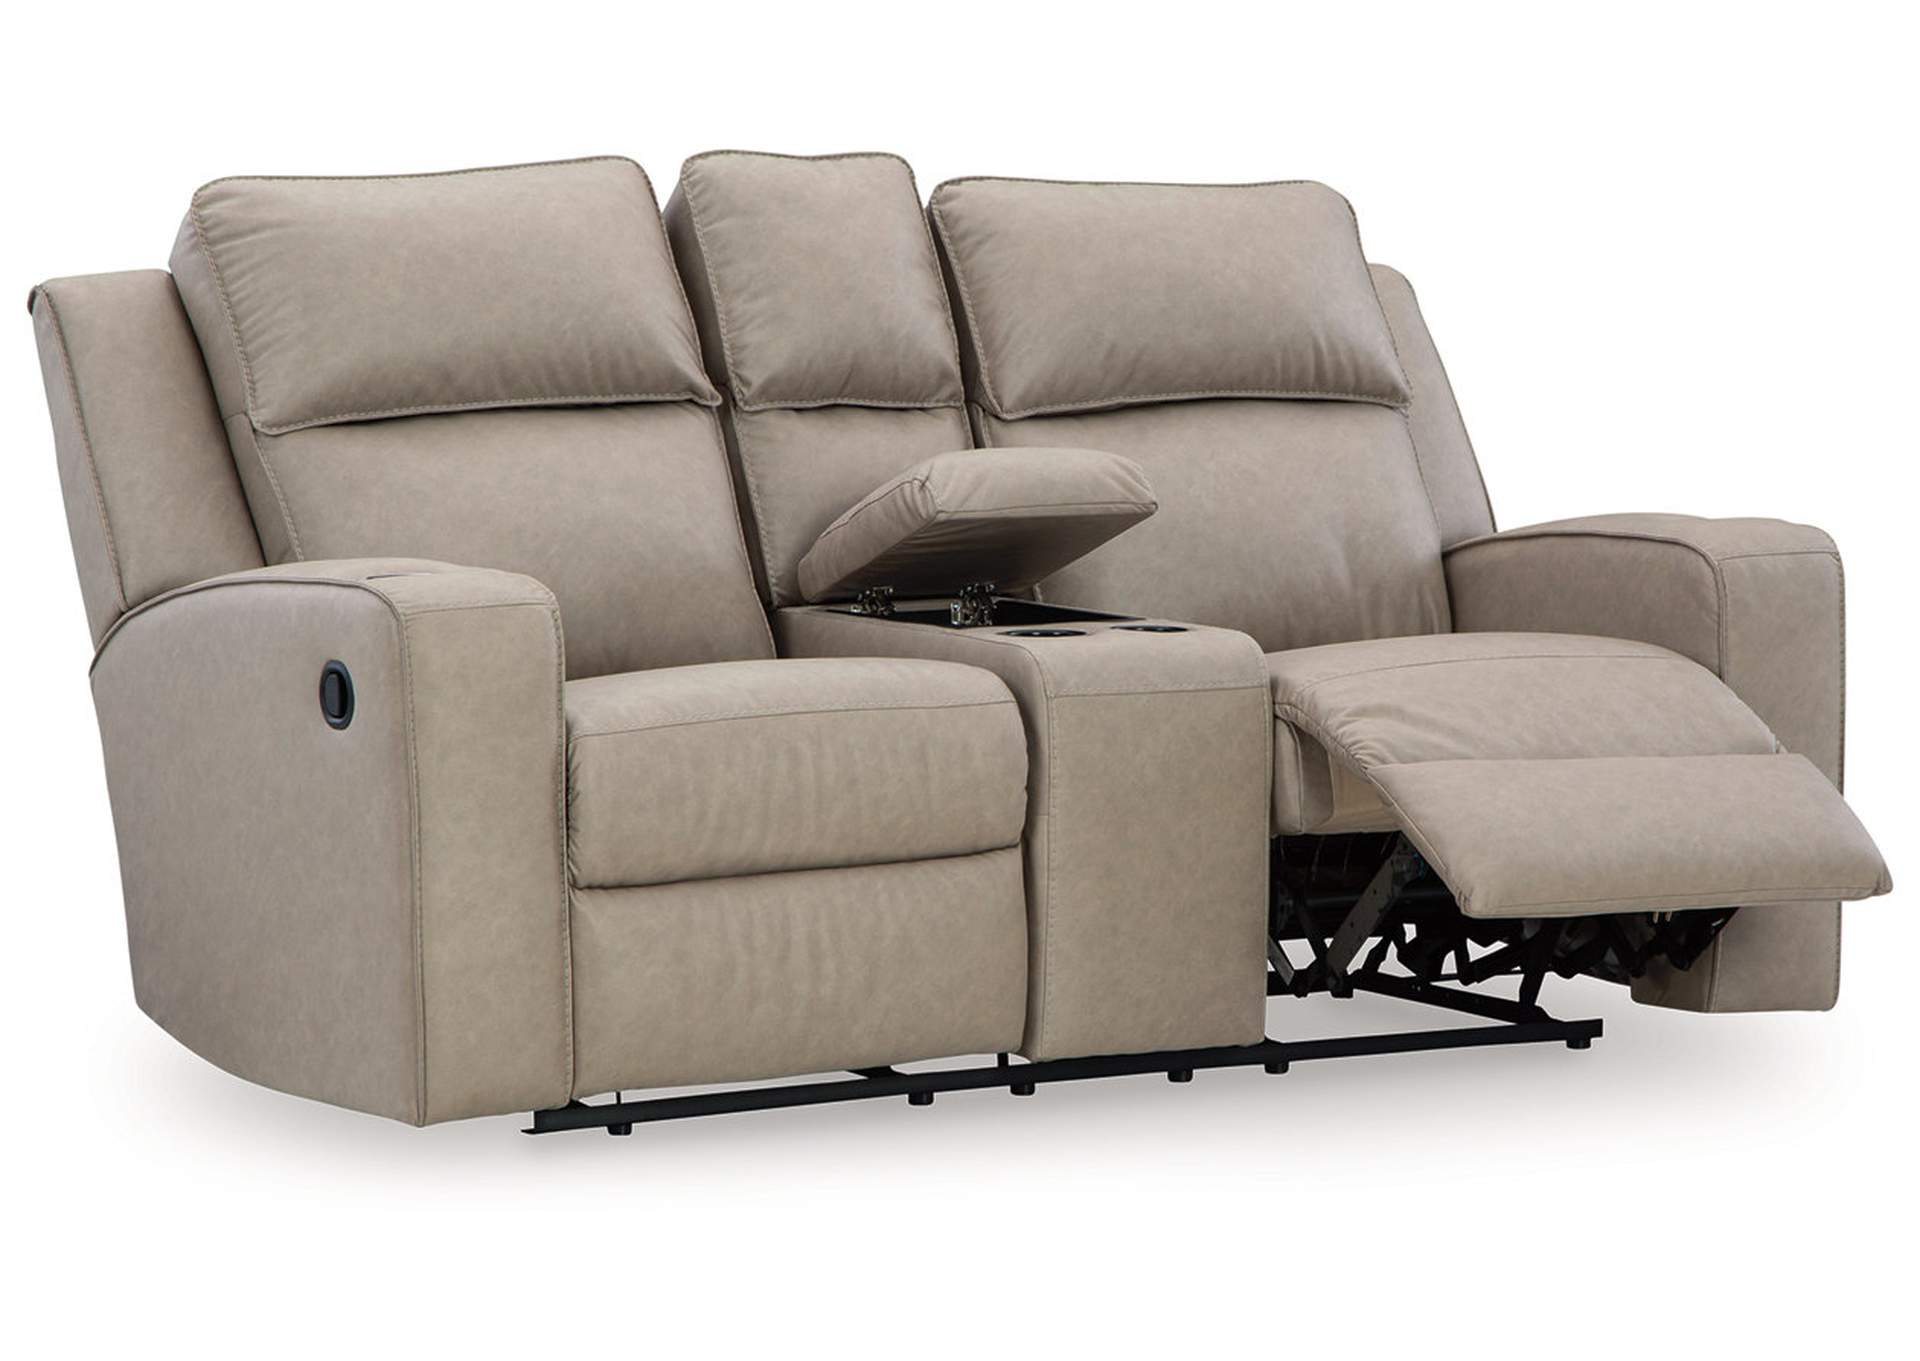 Lavenhorne Reclining Loveseat with Console,Signature Design By Ashley